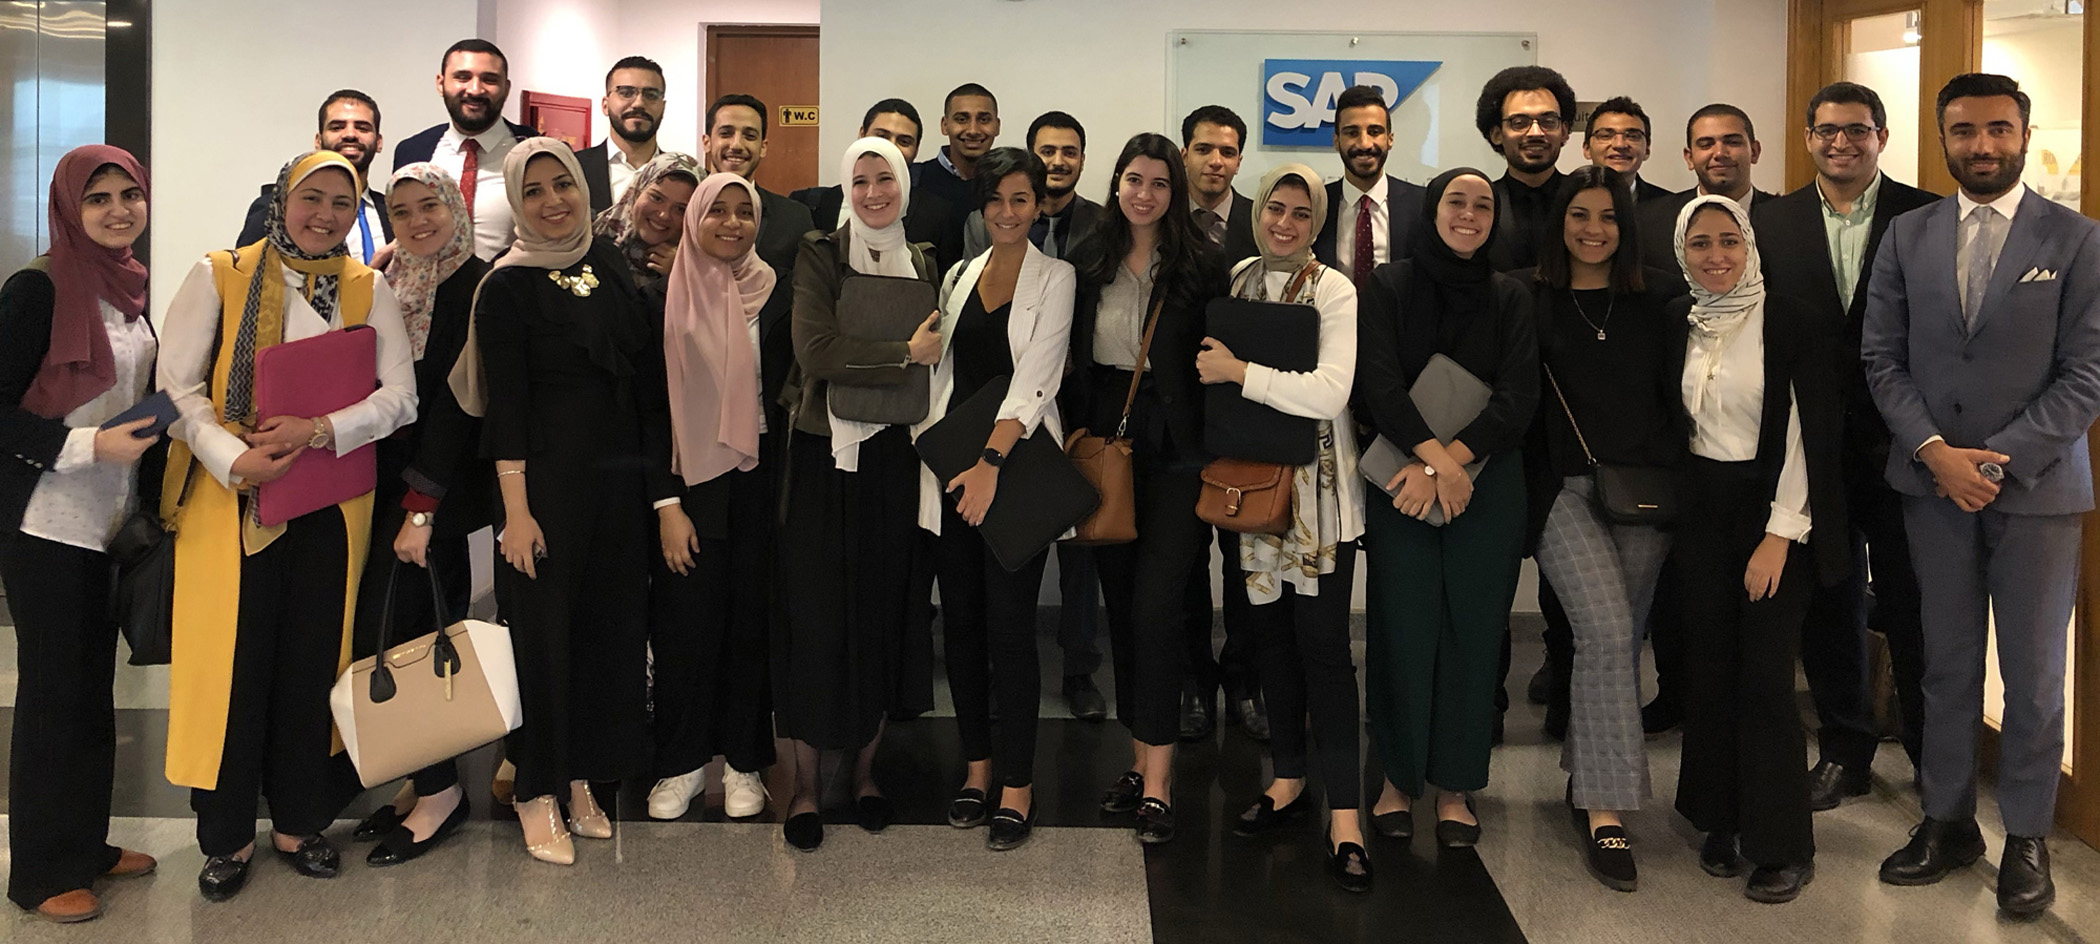 The German Federal Ministry for Economic Cooperation and Development (BMZ) and Deutsche Gesellschaft für Internationale Zusammenarbeit (GIZ) GmbH marked the start of the latest cohort of the SAP Young Professional Program in Egypt in November 2019.